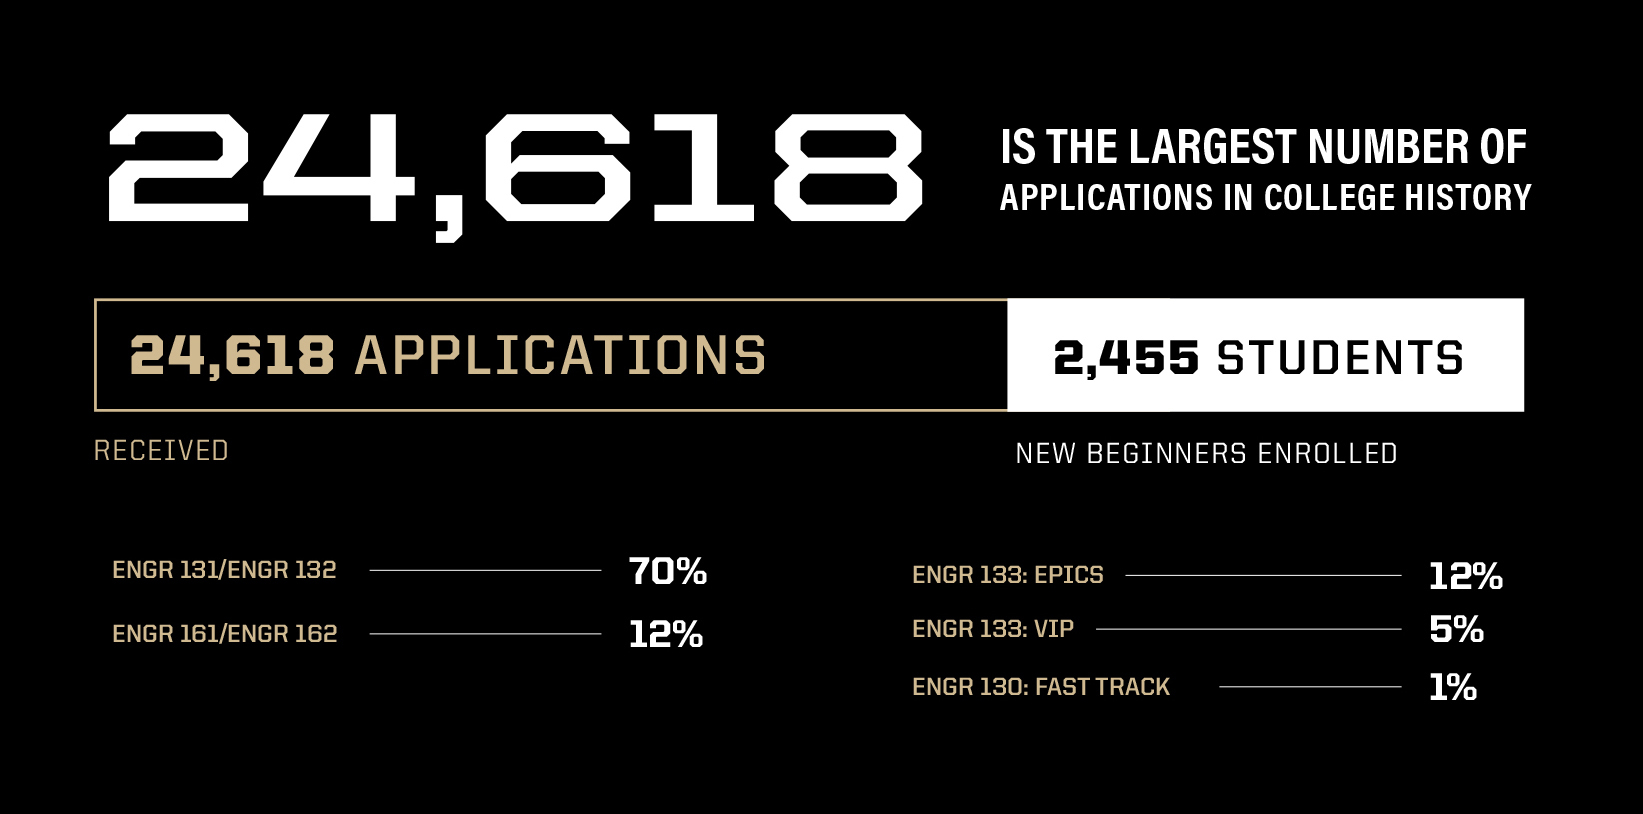 24,618 is the largest number of applications in college history - 2,455 students enrolled.